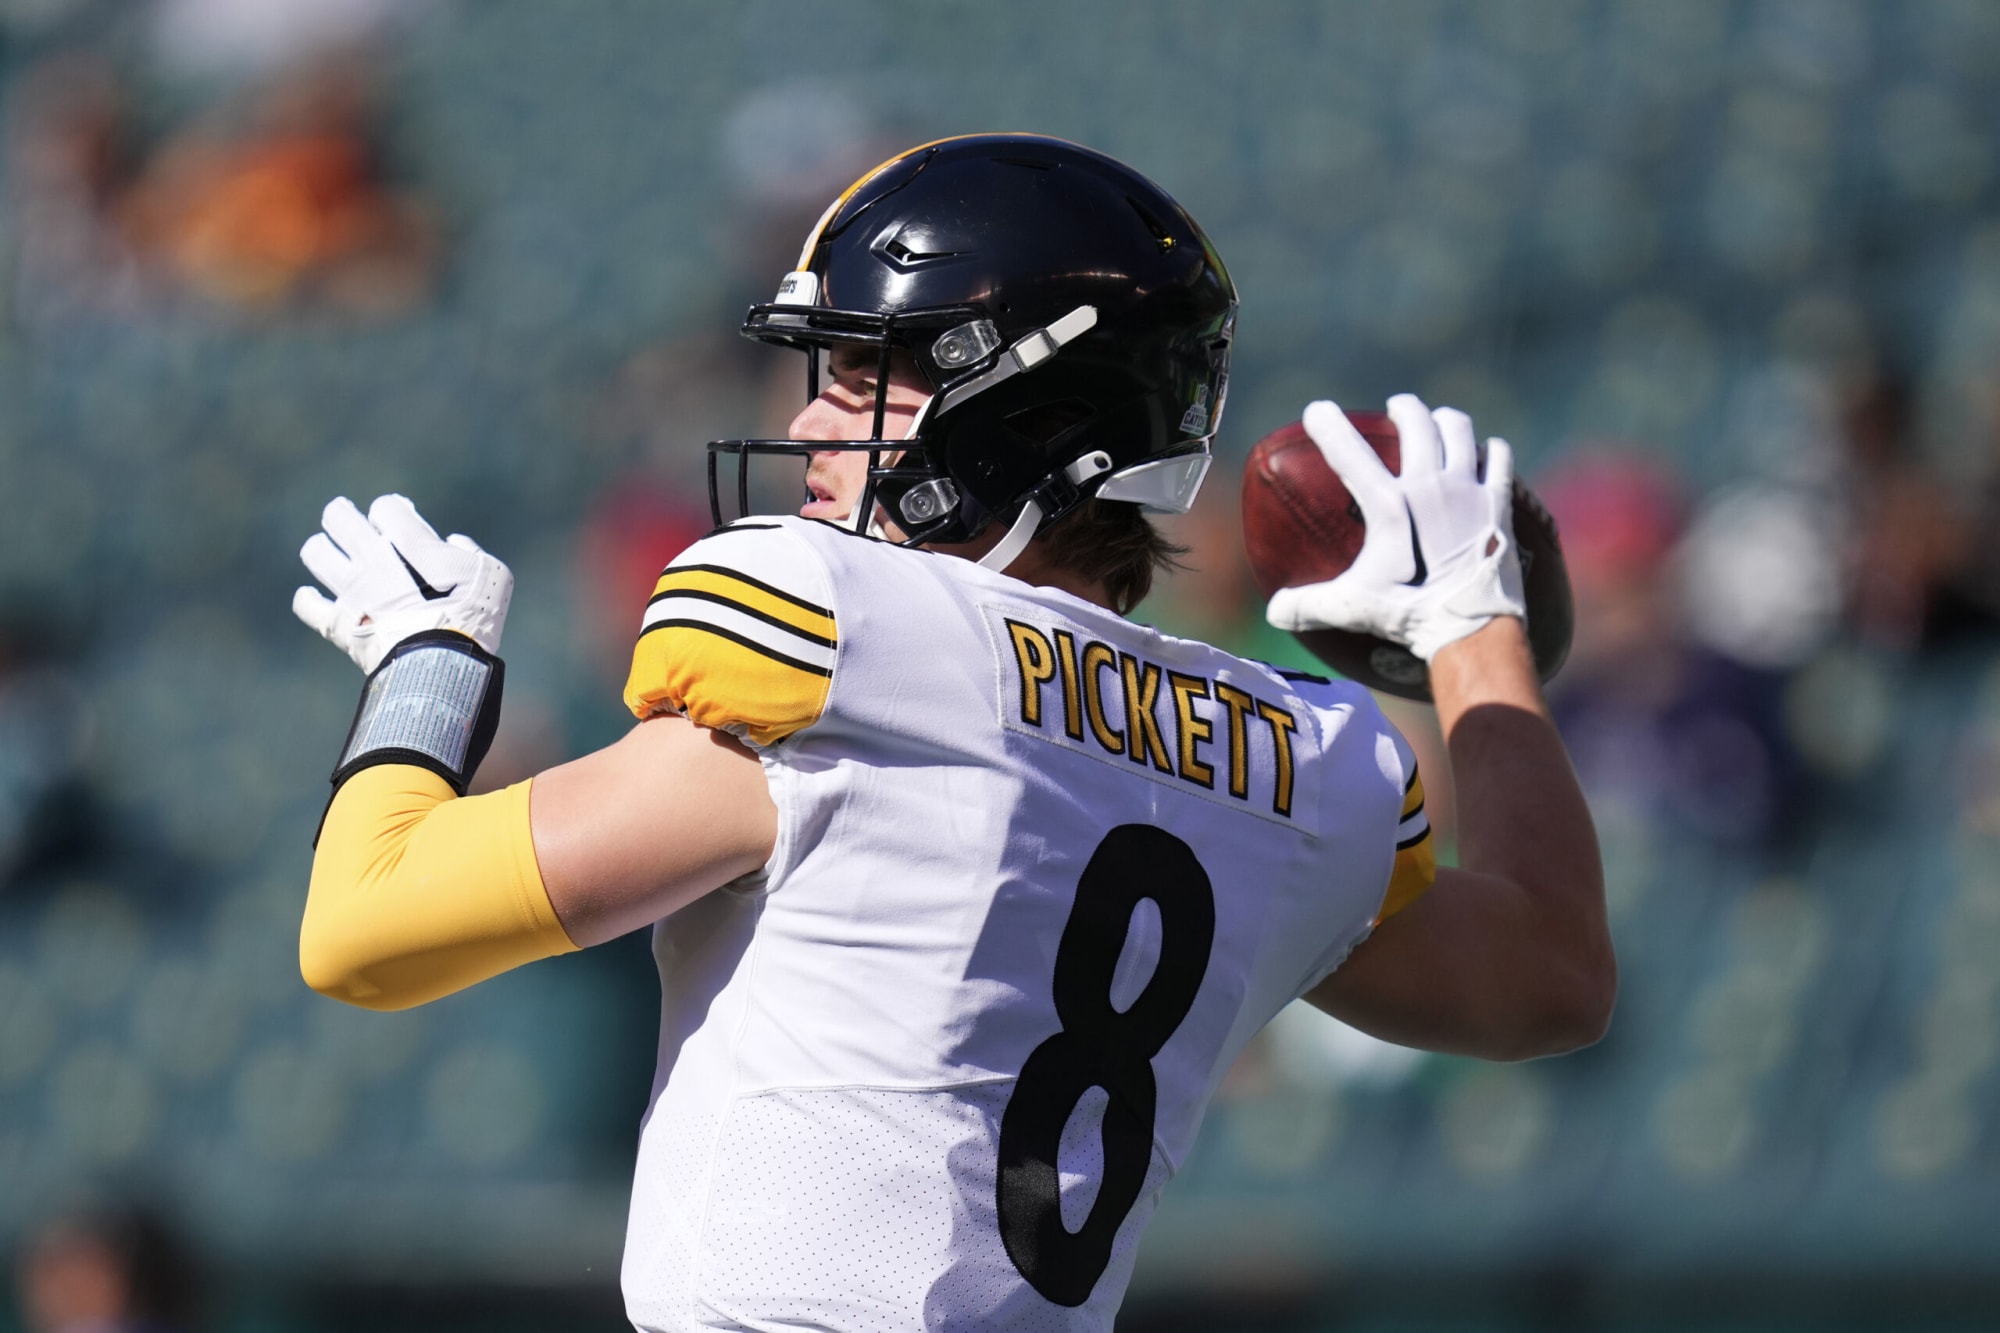 Kenny Pickett says right things about Big Ben, others disagree